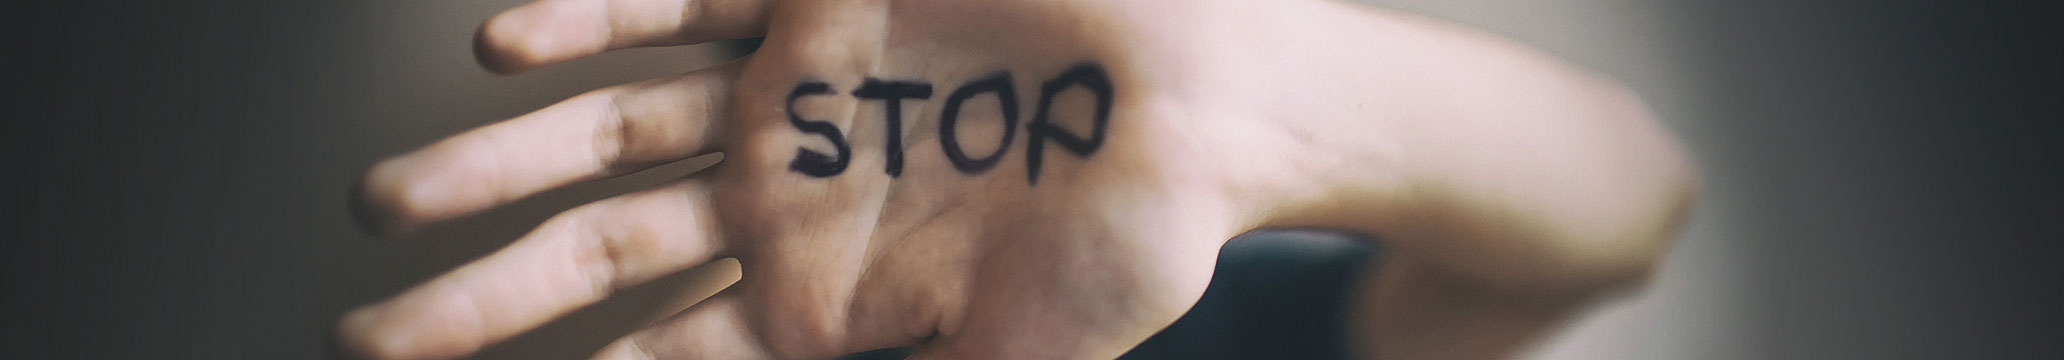 
the word stop written on someone's hand